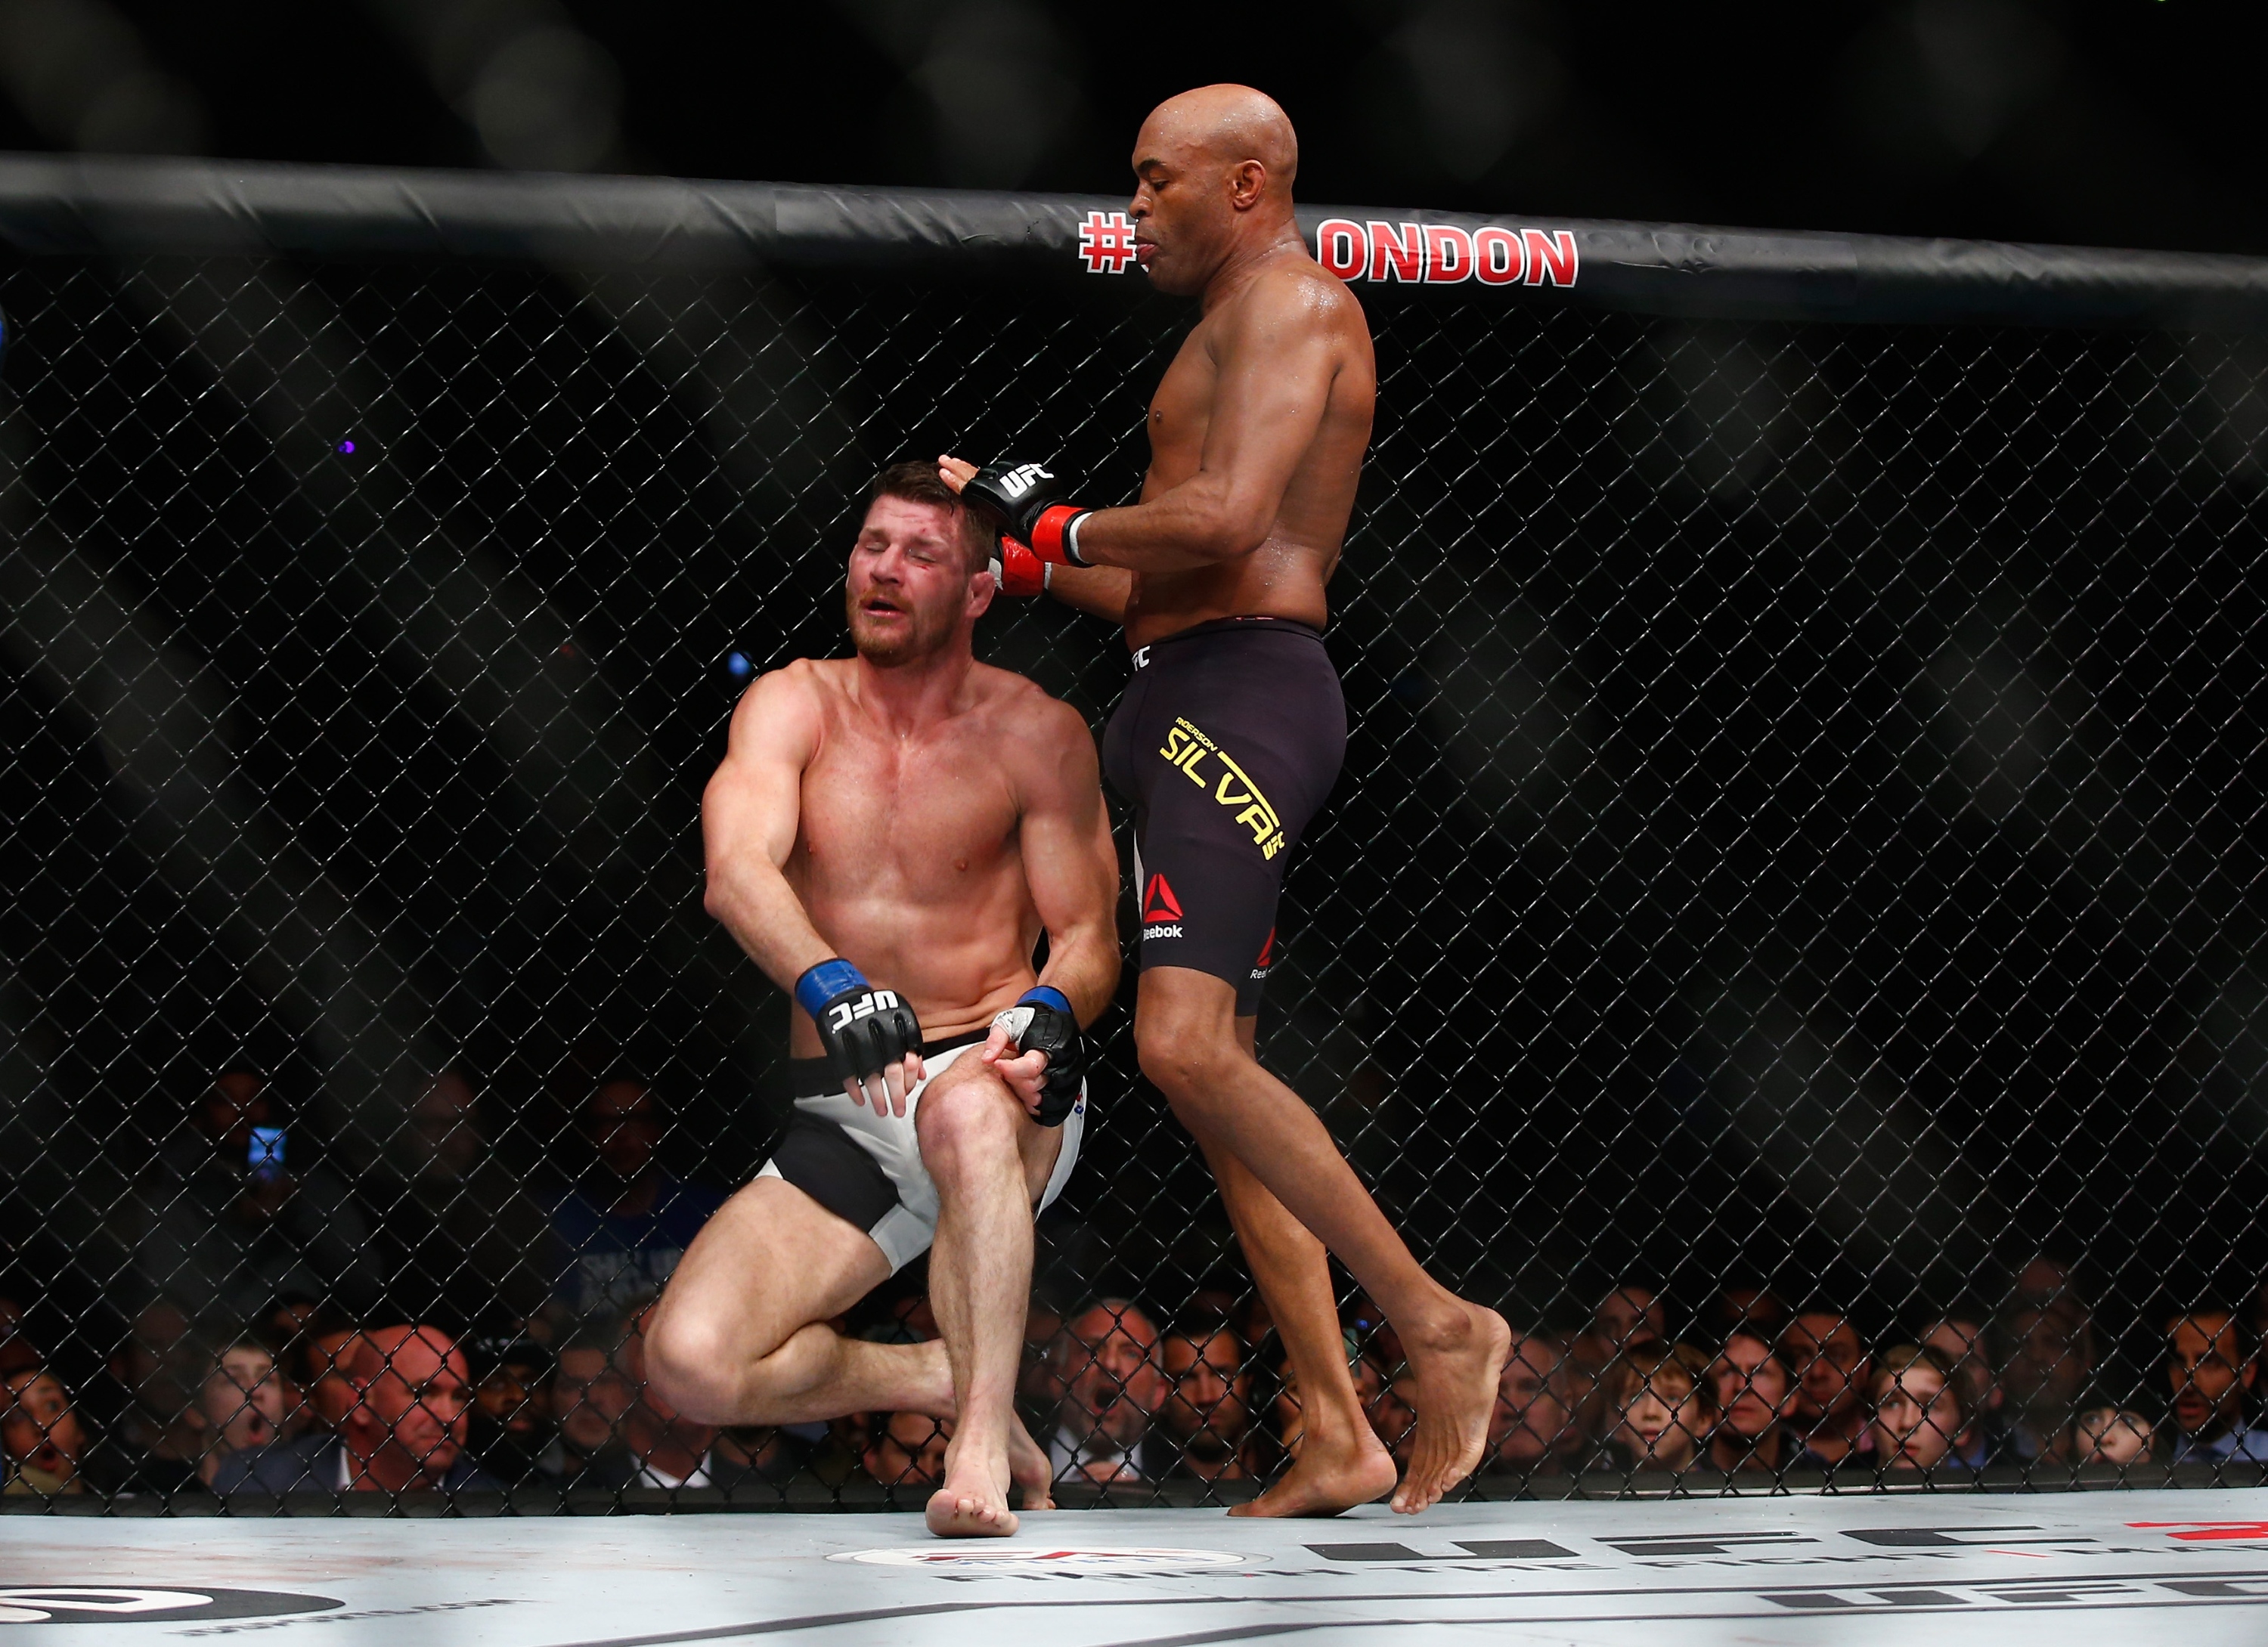 Anderson Silva lands a knee on Michael Bisping at the end of the third round on Saturday. (Getty)